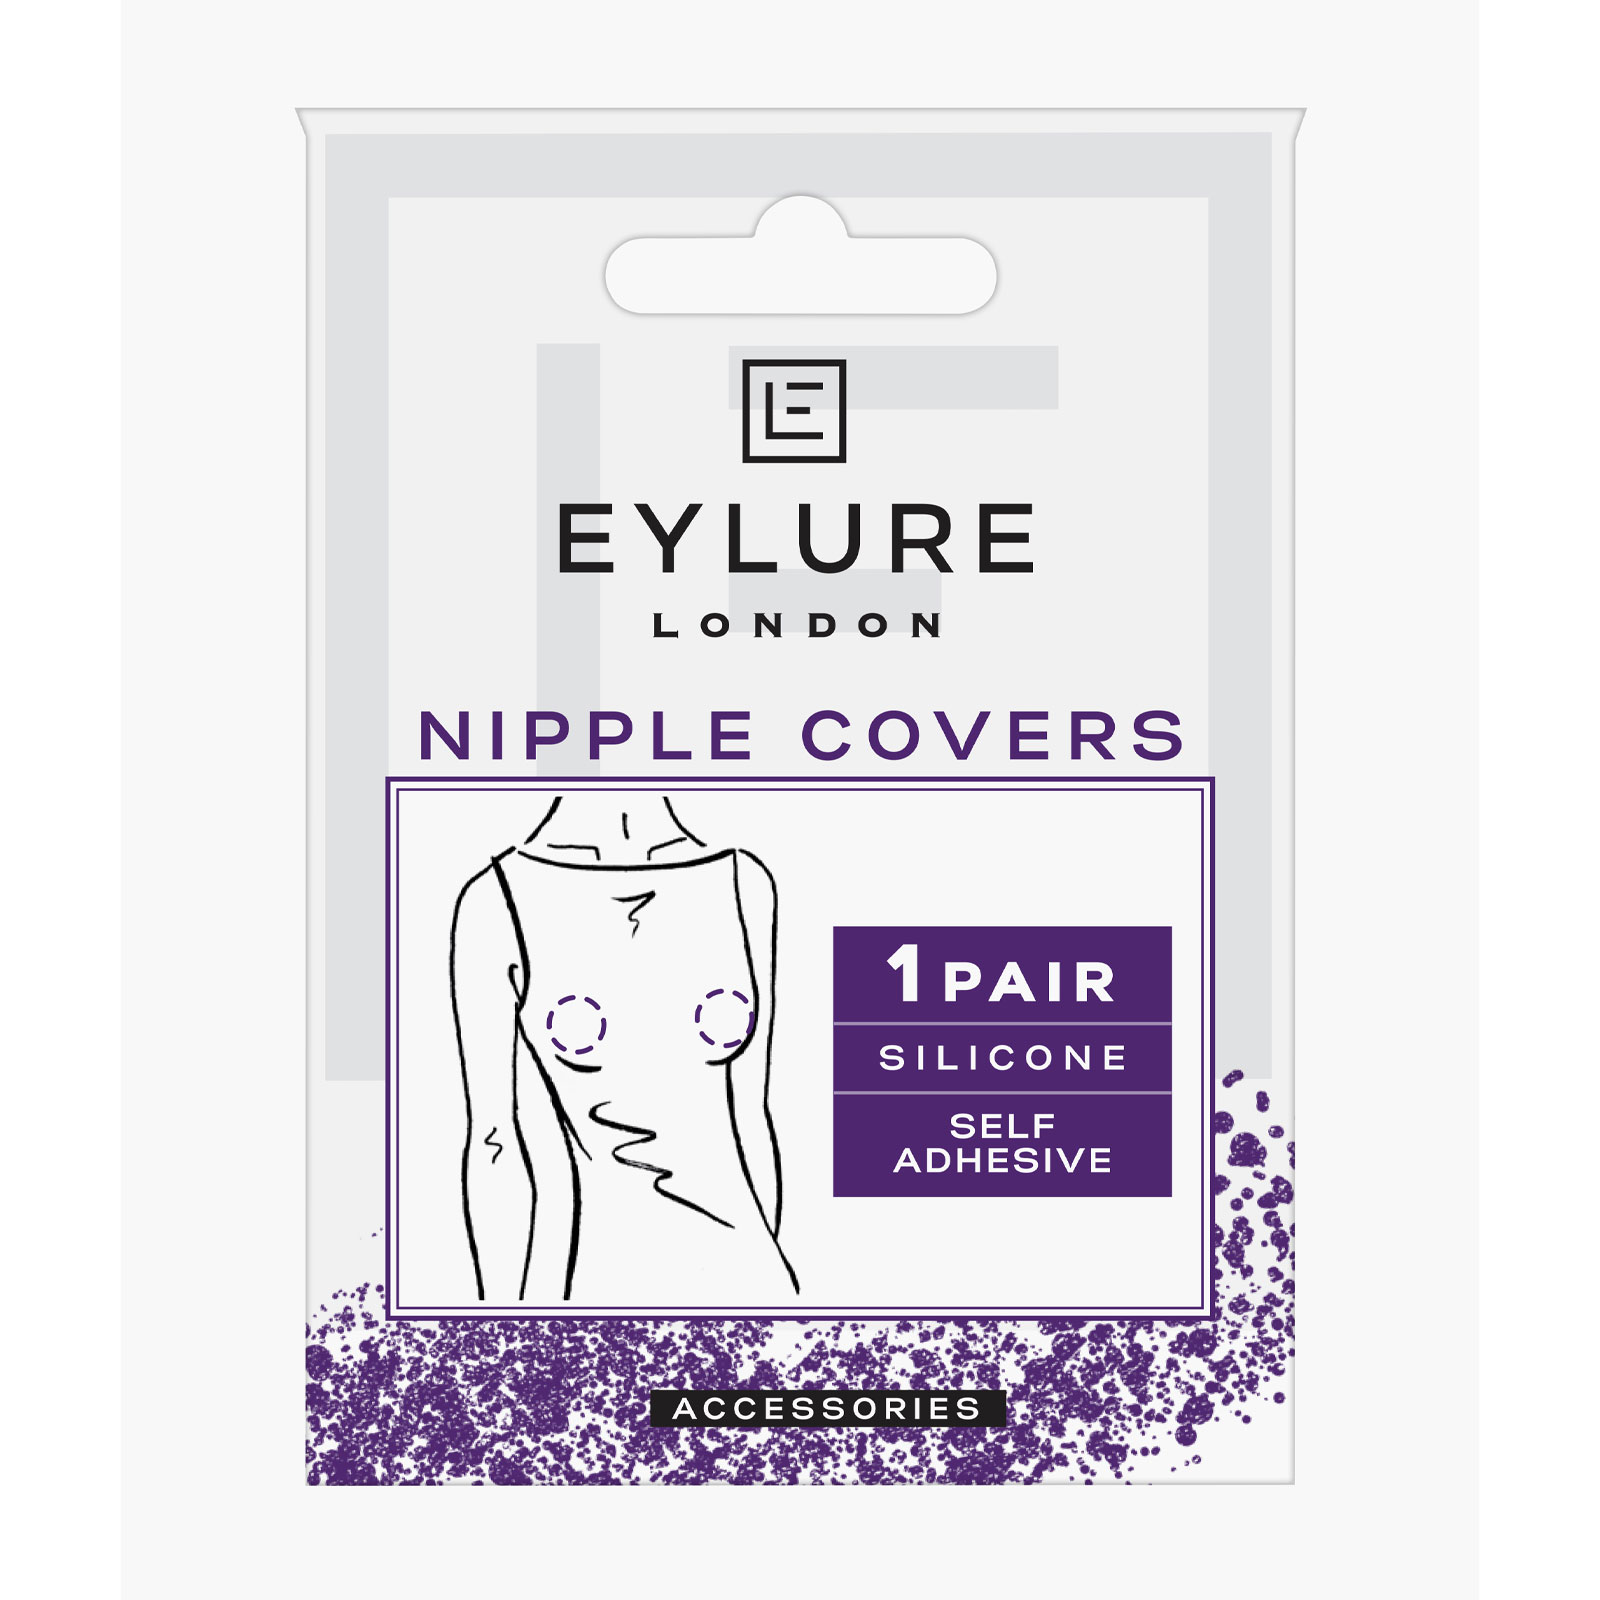 Eylure Nipple Covers Soft Nude Reusable 1 Pair